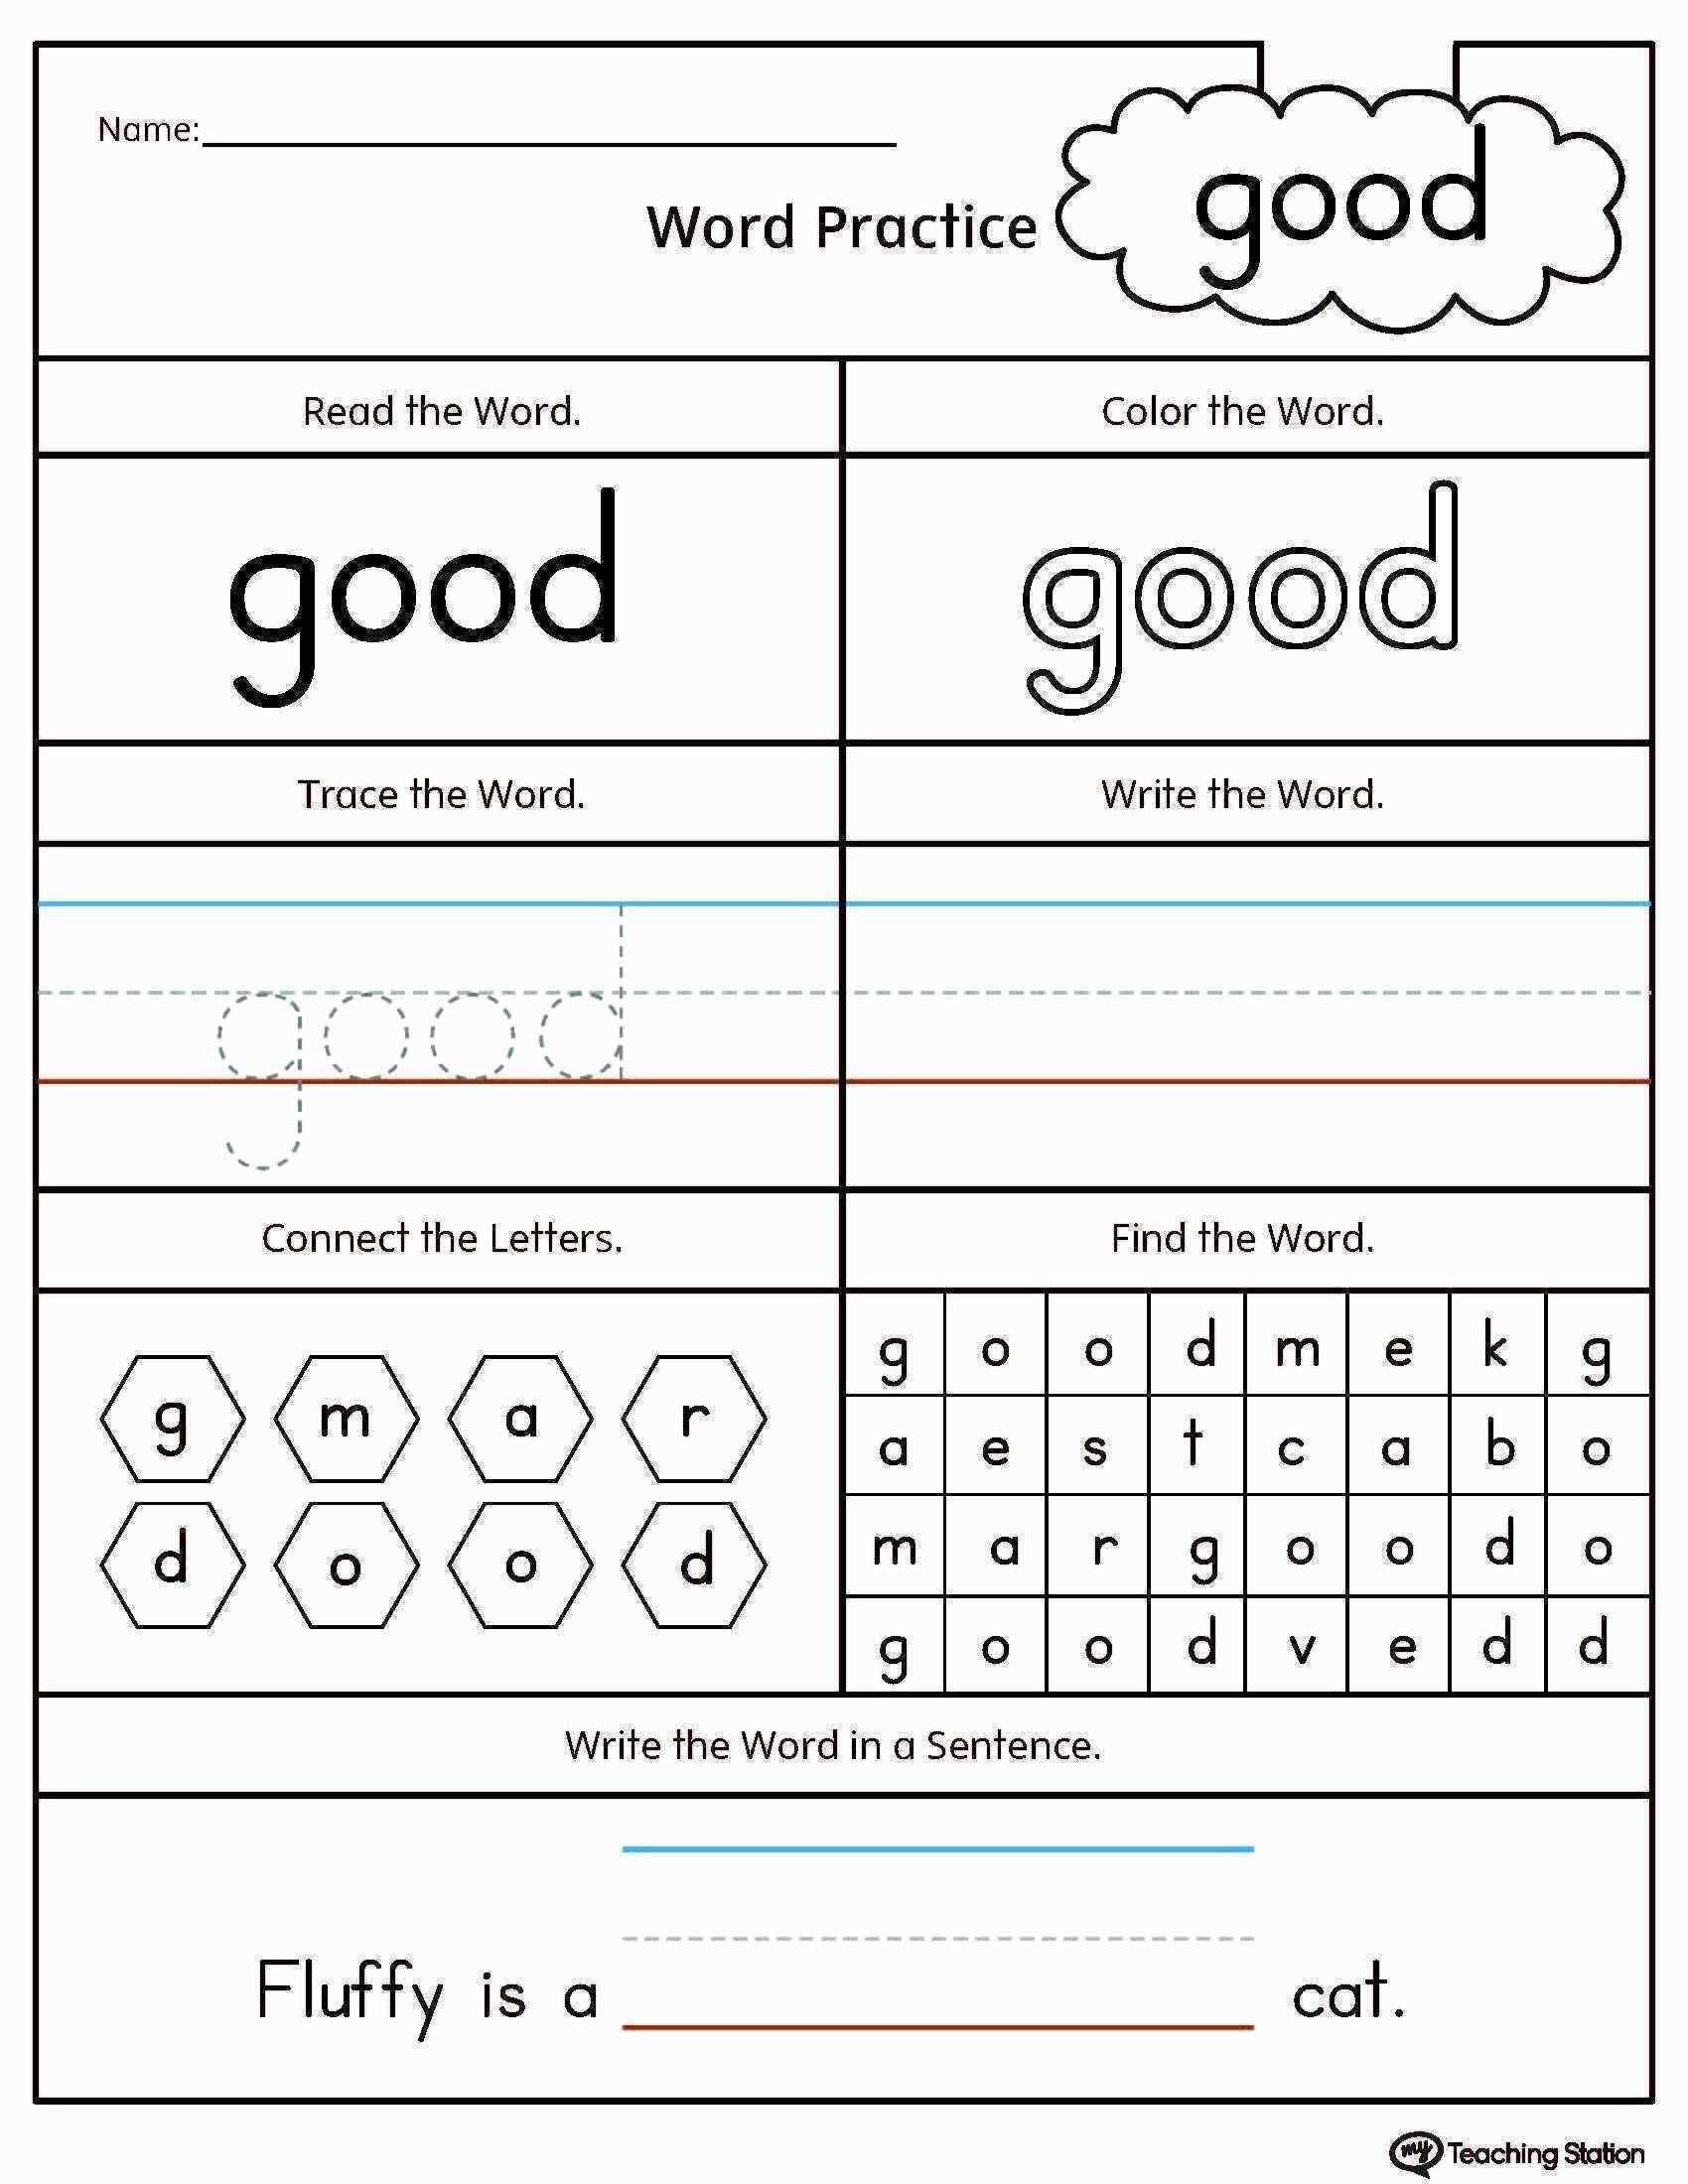 Tracing Name Template Unique Free Printable Name Tracing Templates - Free Printable Name Tracing